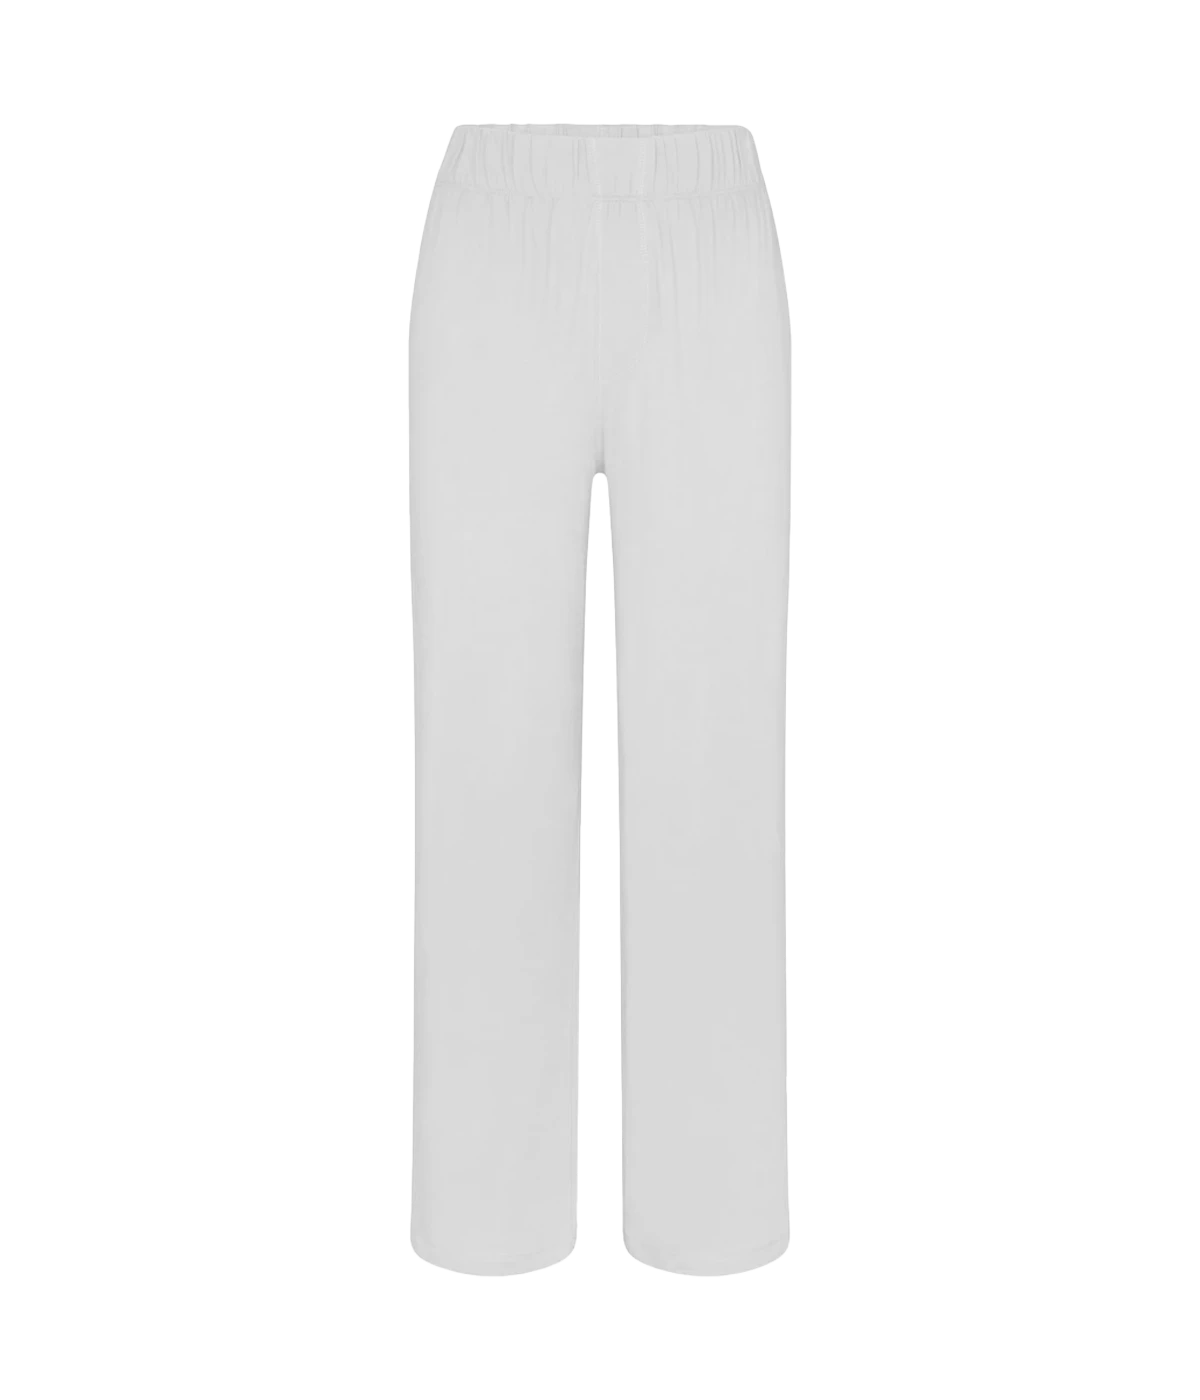 An everyday lounge pant made from 100% cotton, with elasticated waistband and flattering wide leg. Throw on and go, everyday lounge wear, comfortable, made in the USA, chic pyjamas.  